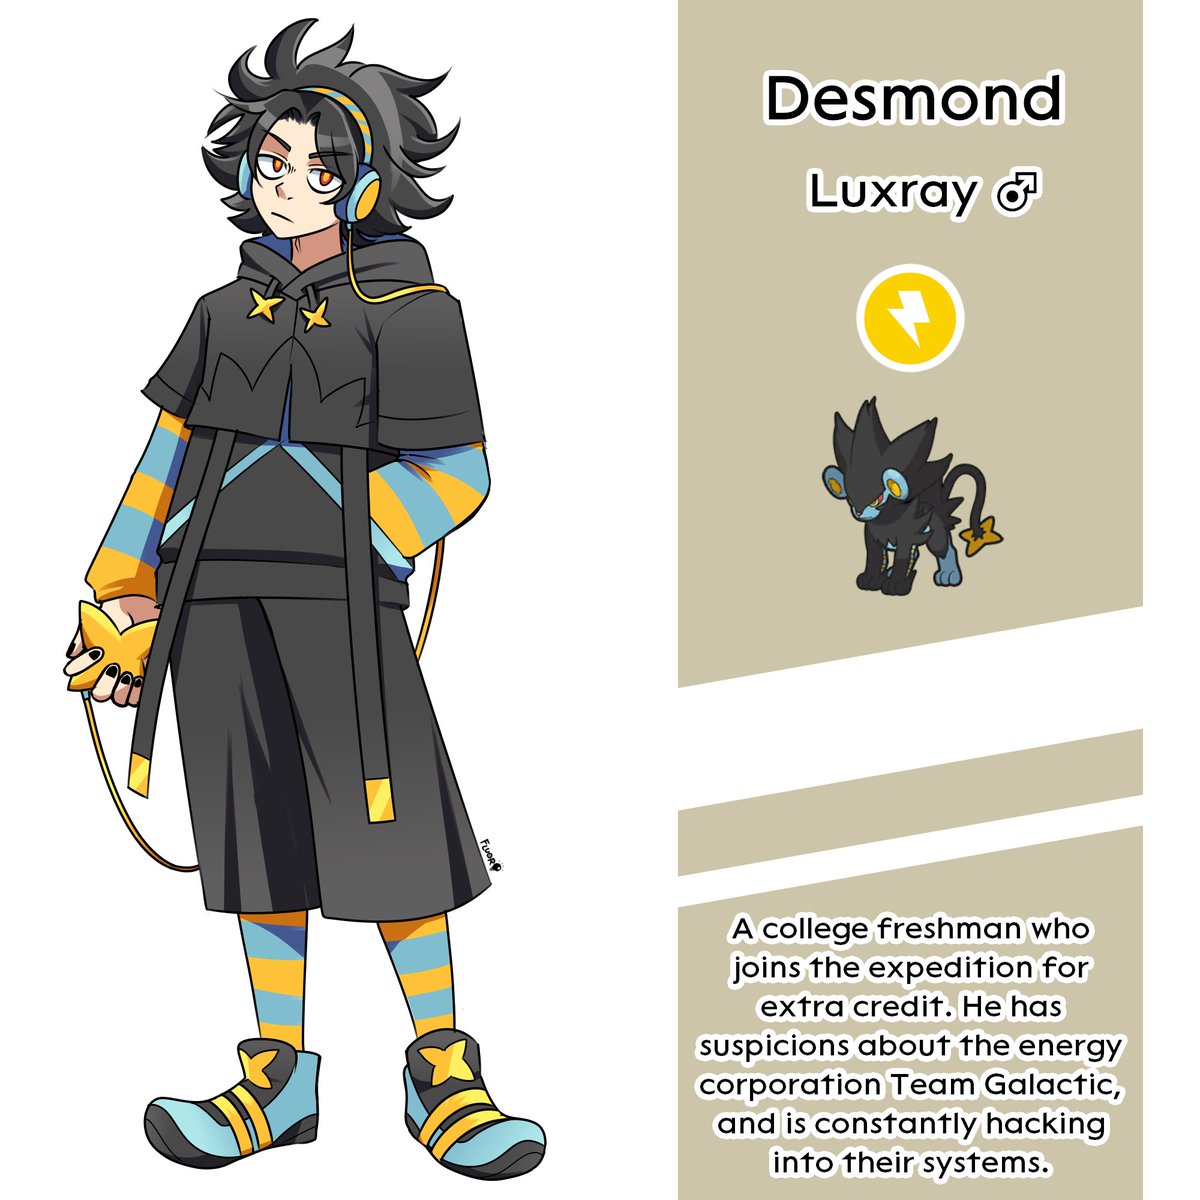 [#Pokemon] Gijinka / humanizations of my Platinum team (Infernape, Staraptor, Luxray)! The plot of this one's lore is "eccentric people hunt for proof that Giratina is real and Team Galactic is evil" (1/2) 